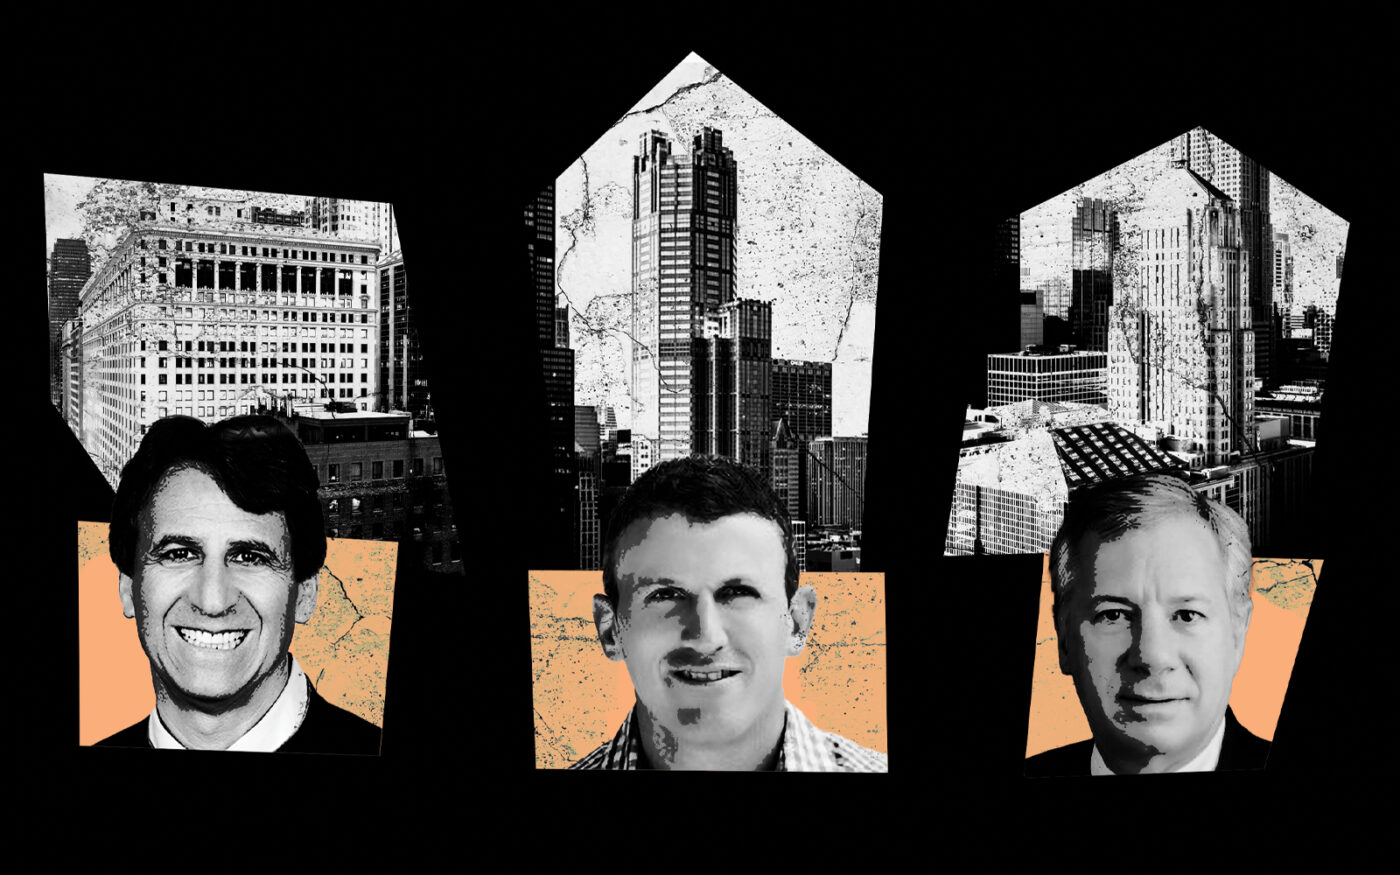 From left: 175 West Jackson Boulevard with Apollo Global’s Marc Rowan; 311 South Wacker with Farbman Group’s Andy Farbman; 141 West Jackson Boulevard with Marc Realty’s Jerry Nudo (Photo-illustration by Kevin Cifuentes/The Real Deal)